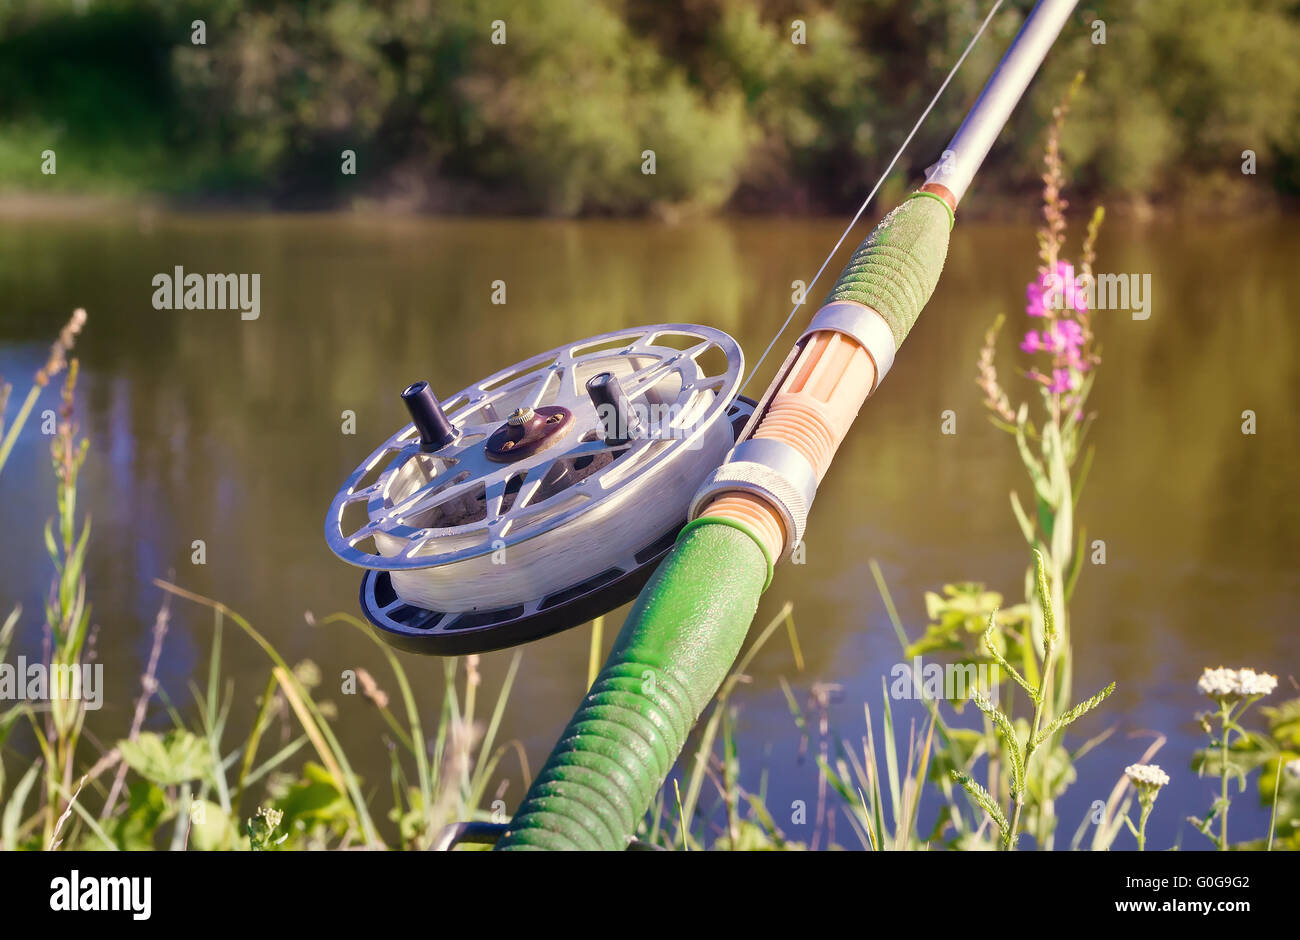 https://c8.alamy.com/comp/G0G9G2/fishing-tackle-for-catching-fish-in-the-river-G0G9G2.jpg